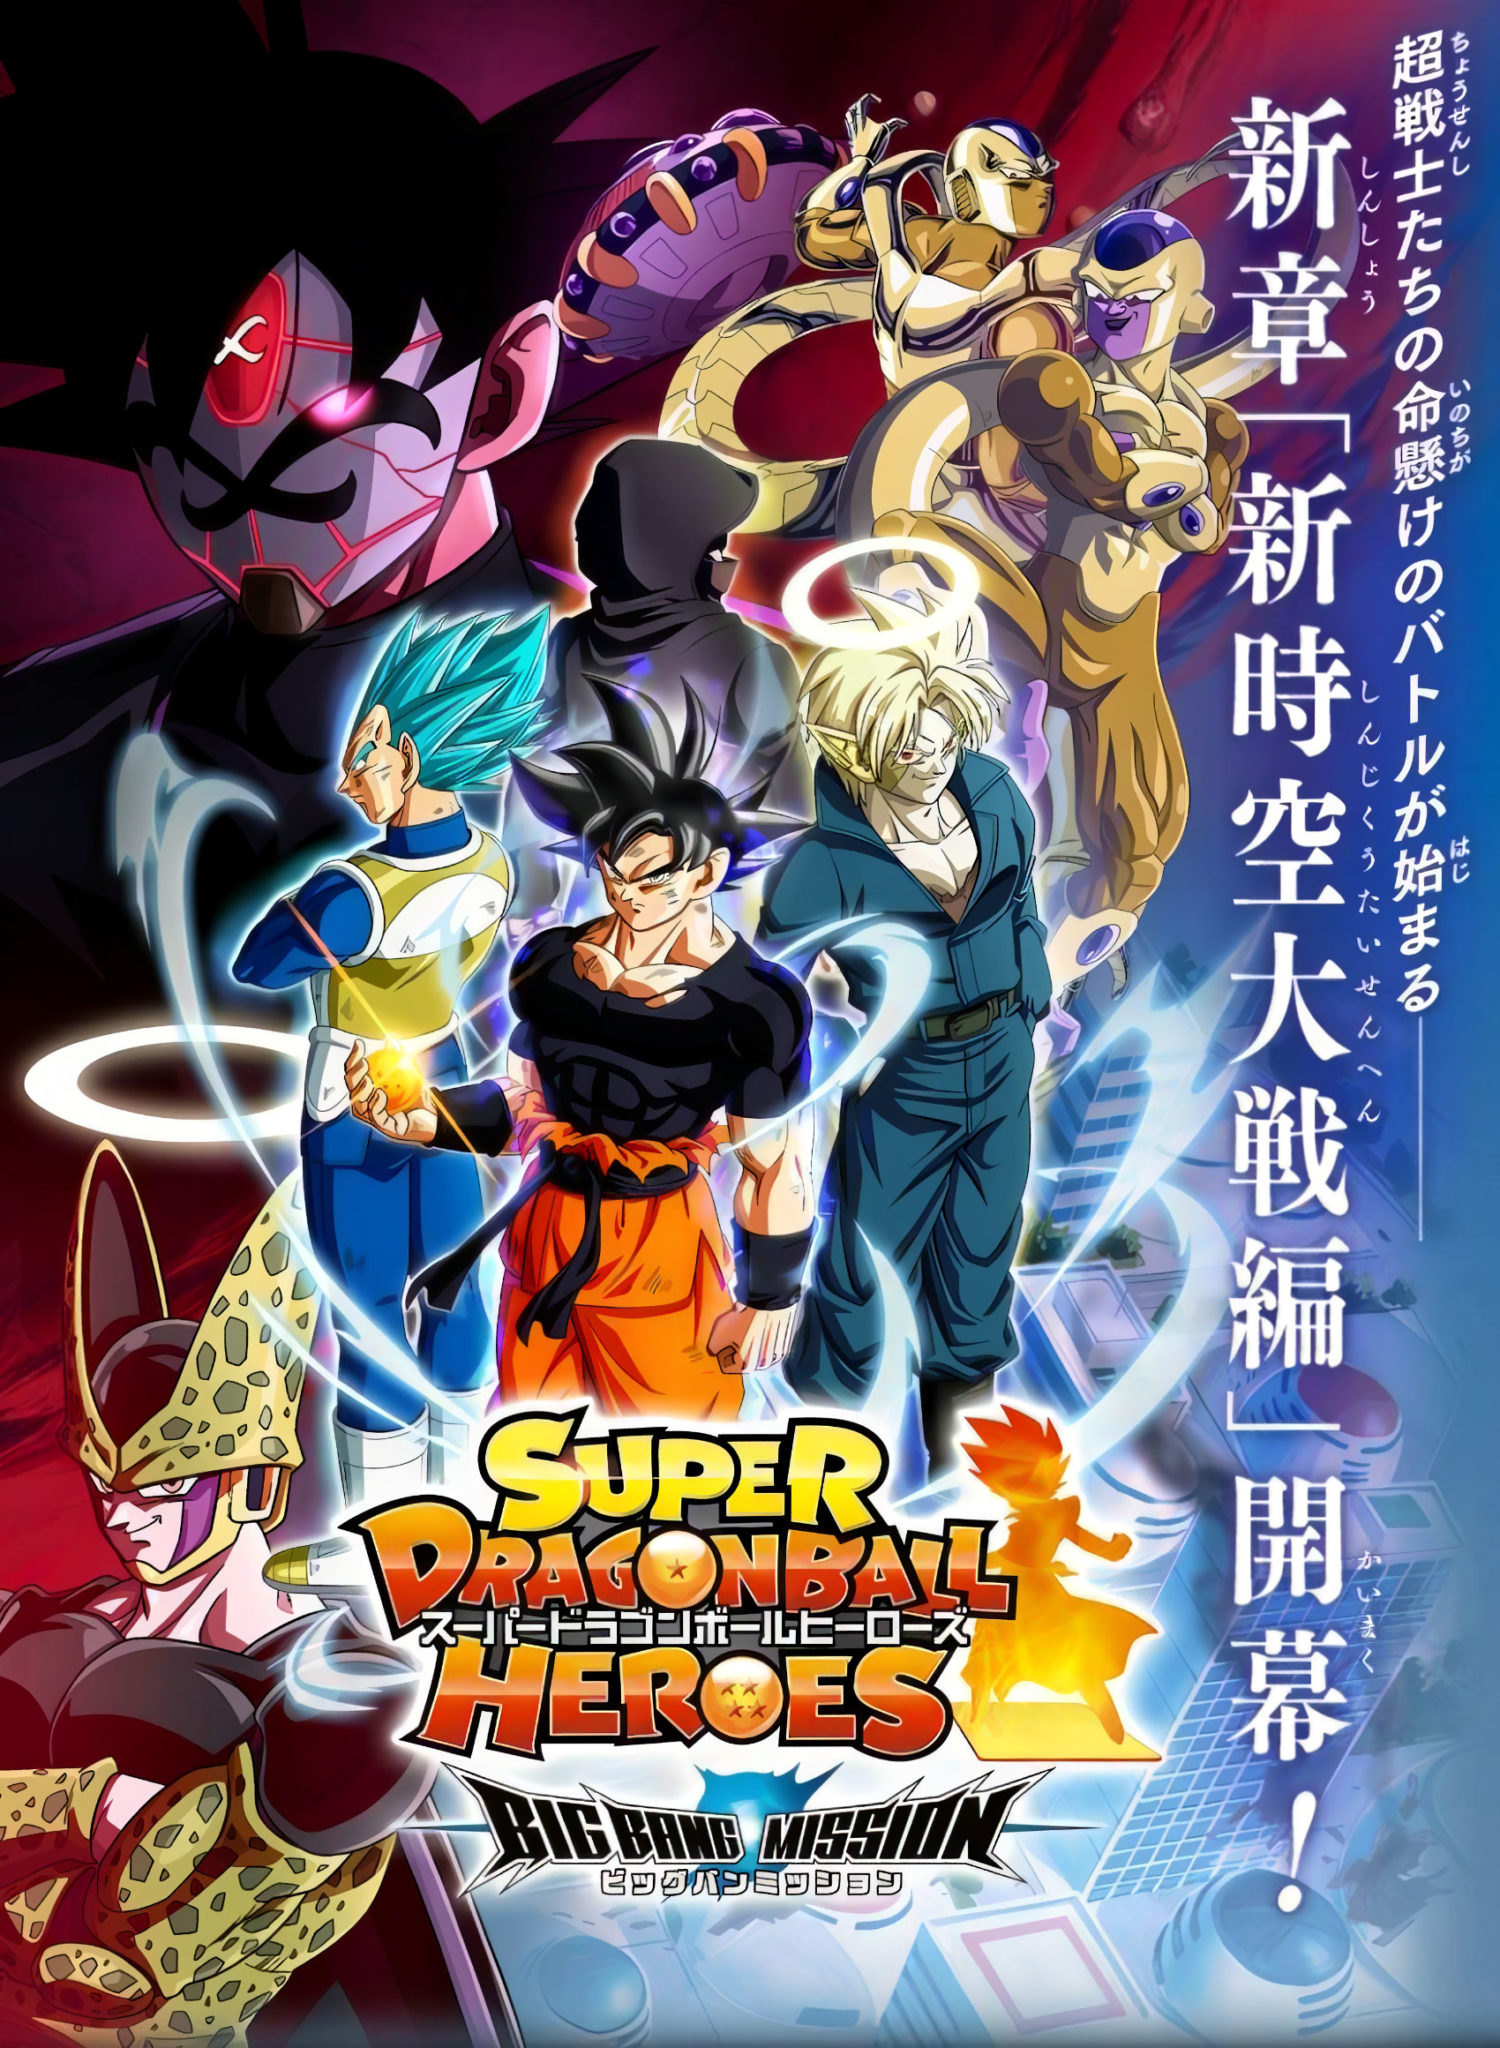 Dragon Ball Heroes Unites The Perfect Tag-Team for the Future! | Manga  Thrill